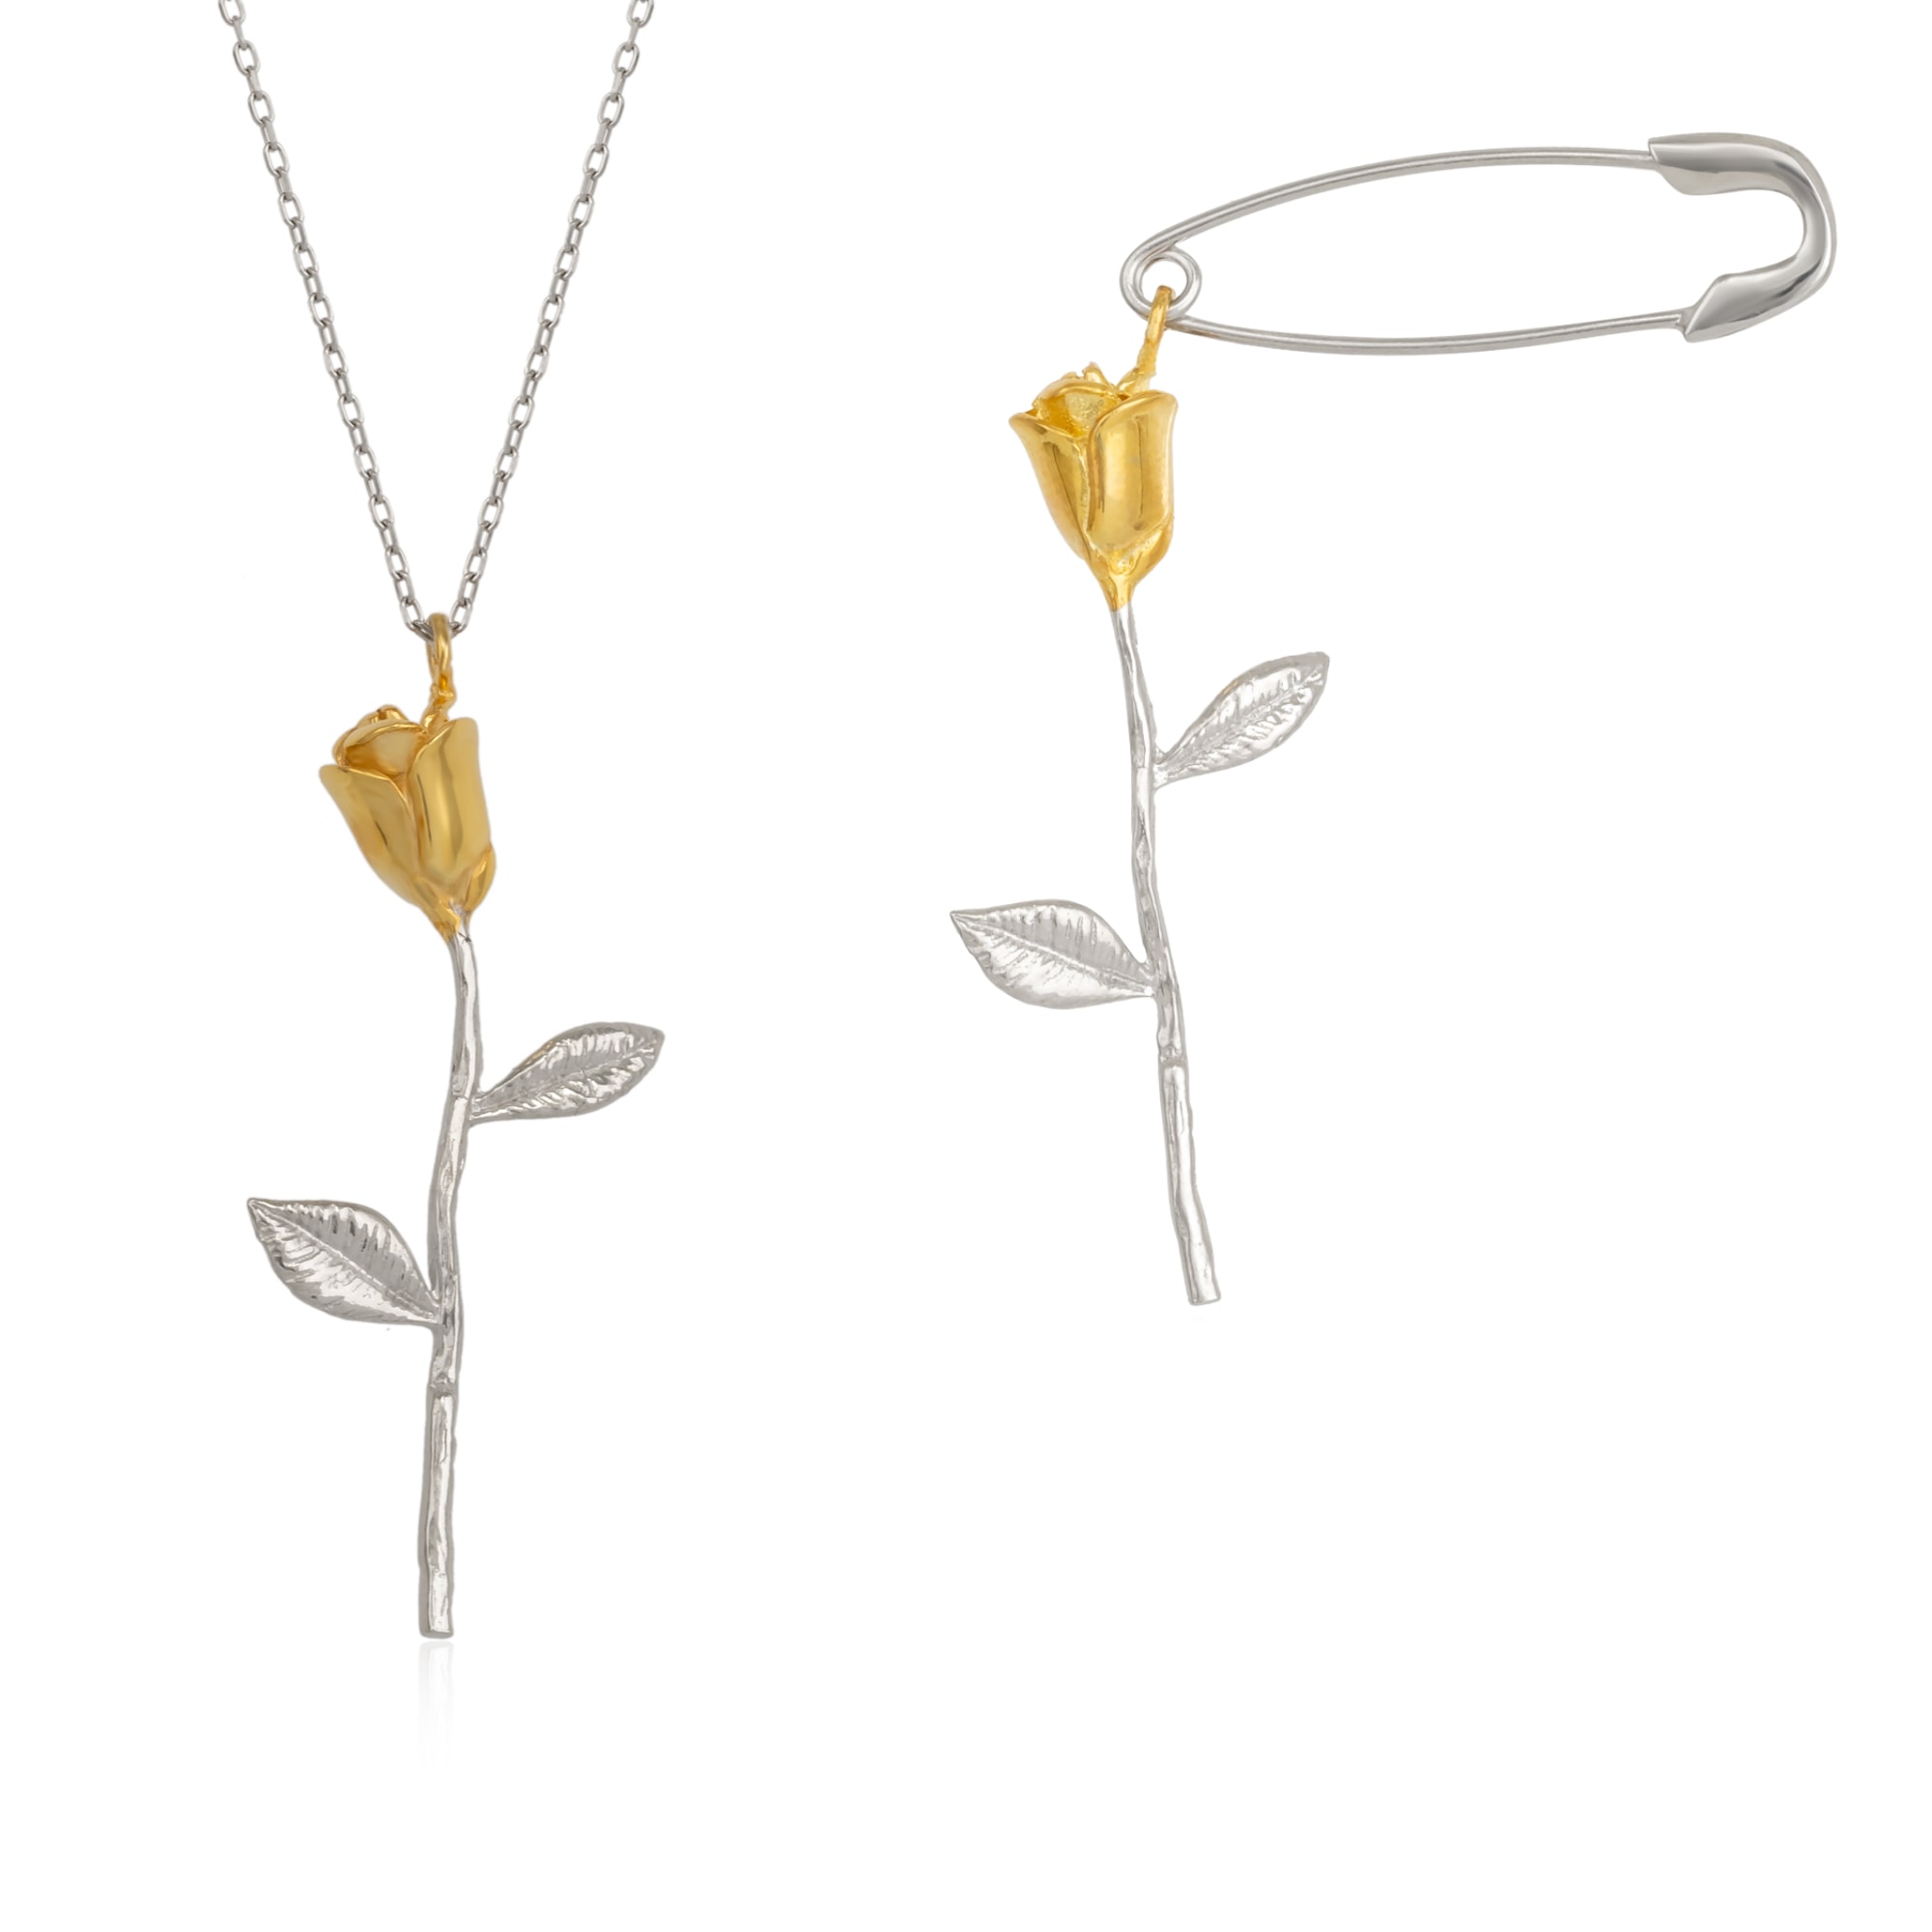 Spero London Women's Gold Color Rose Sterling Silver Necklace & Safety Pin Earring Set In Yellow